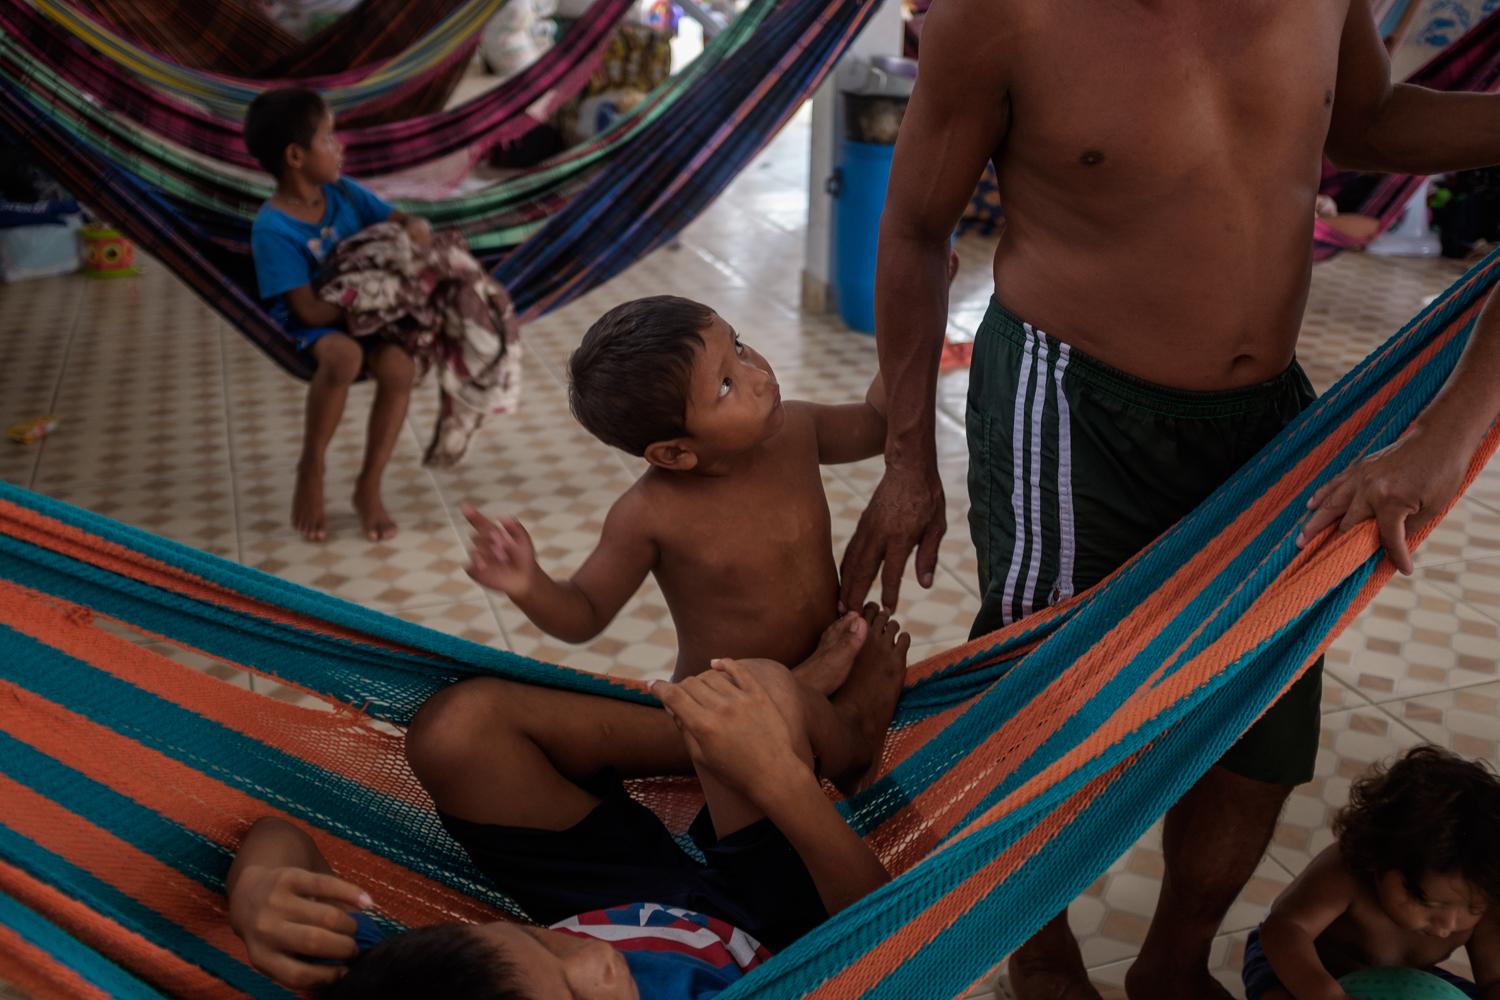 A Warao child tries to get his father&#39;s attention at a makeshift shelter housing Venezuelan indigenous refugees in Manaus in Amazonas state, Brazil, November, 2020. Indigenous people have been migrating to the city from all over the region for decades, looking for work, access to education, jobs and healthcare and a better life. Like the refugees form Venezuela, many indigenous people arrive in the city to find a shortage of housing, poor access to public services, discrimination and a faltering economy aggravated by a deadly pandemic.